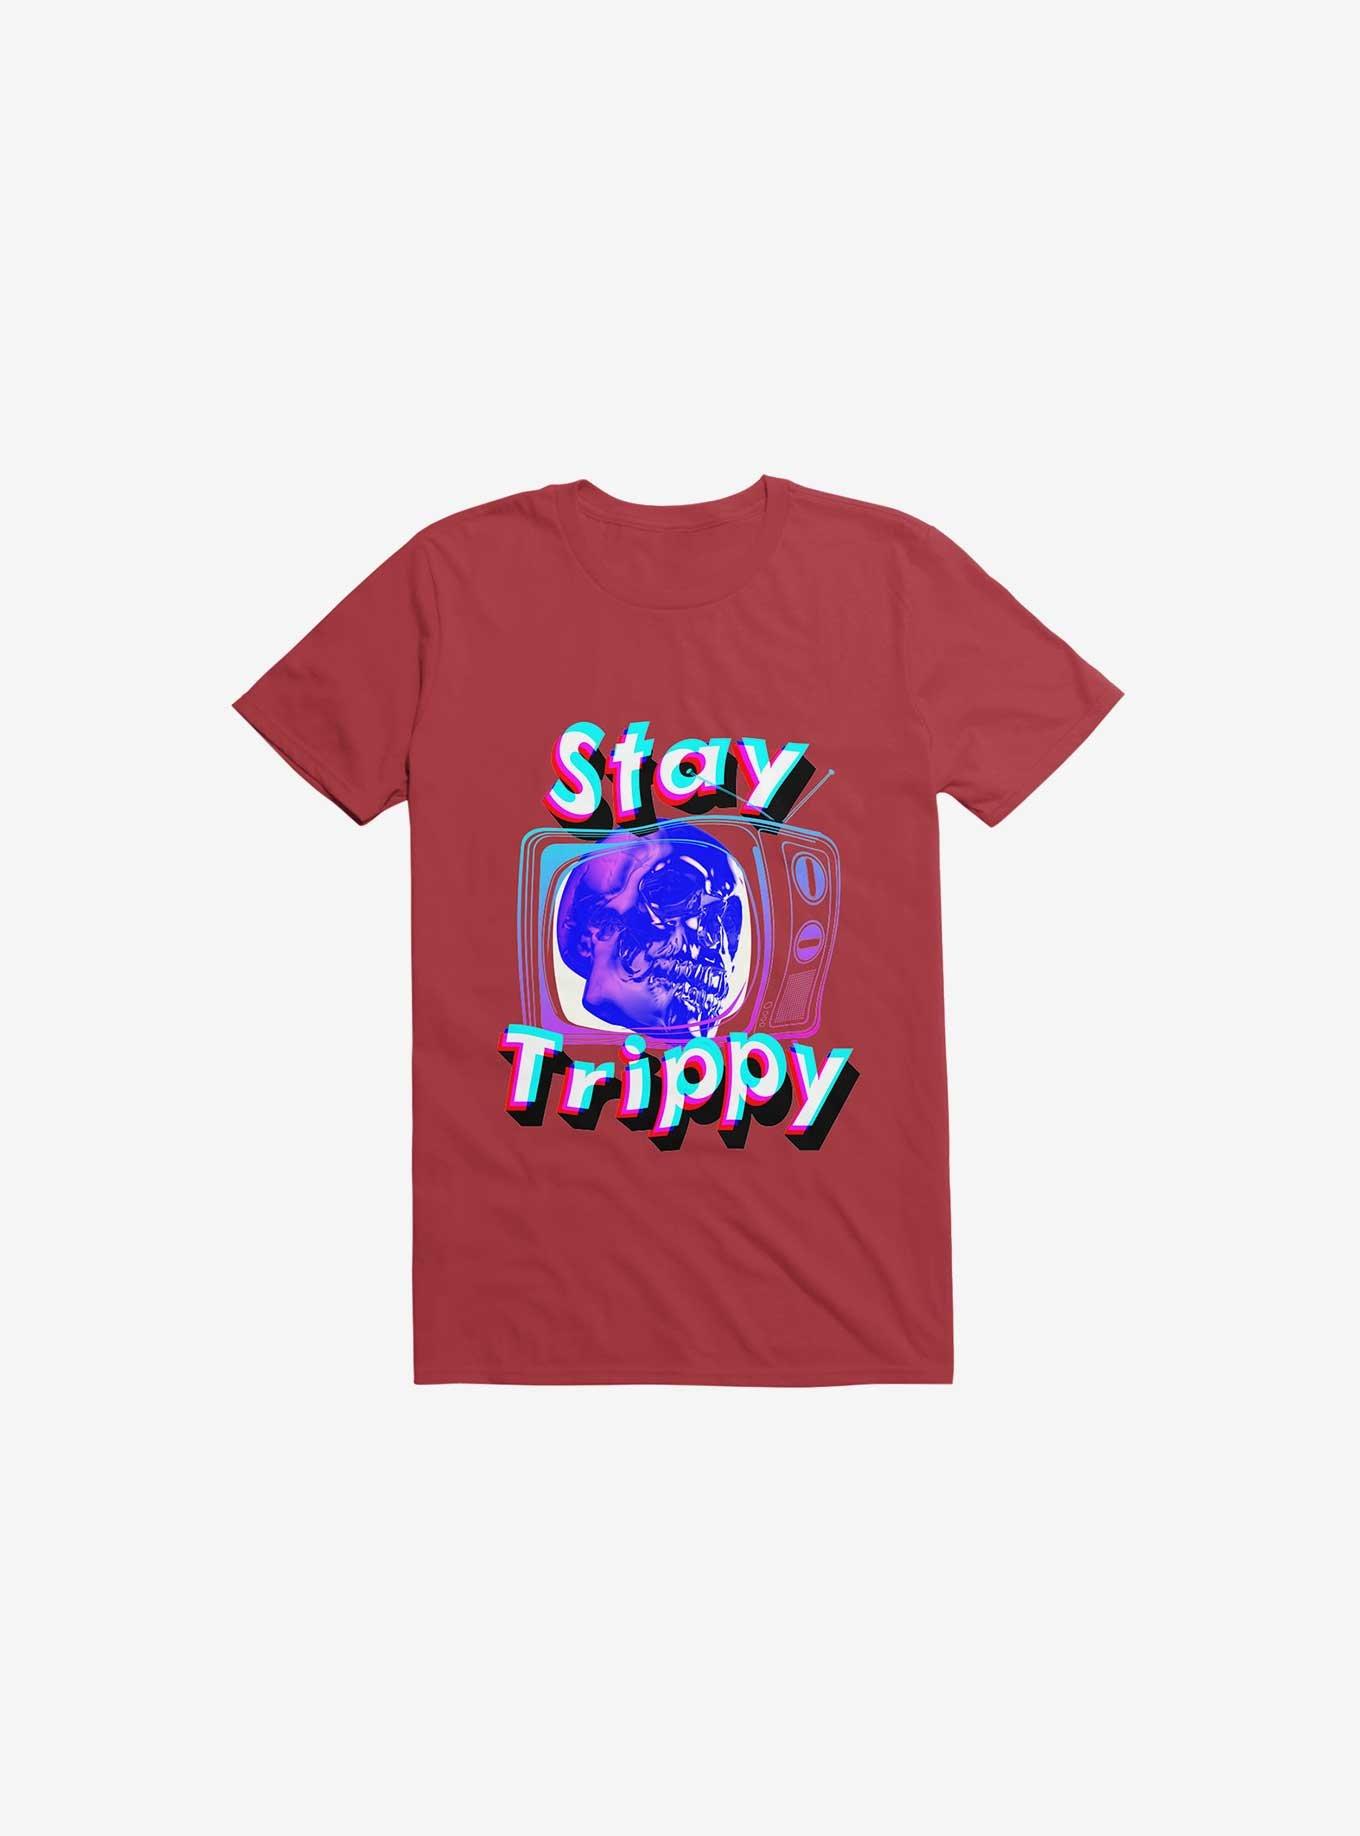 Stay Trippy Cute Retro Aesthetic Universal Vibe Skull Red T-Shirt, RED, hi-res